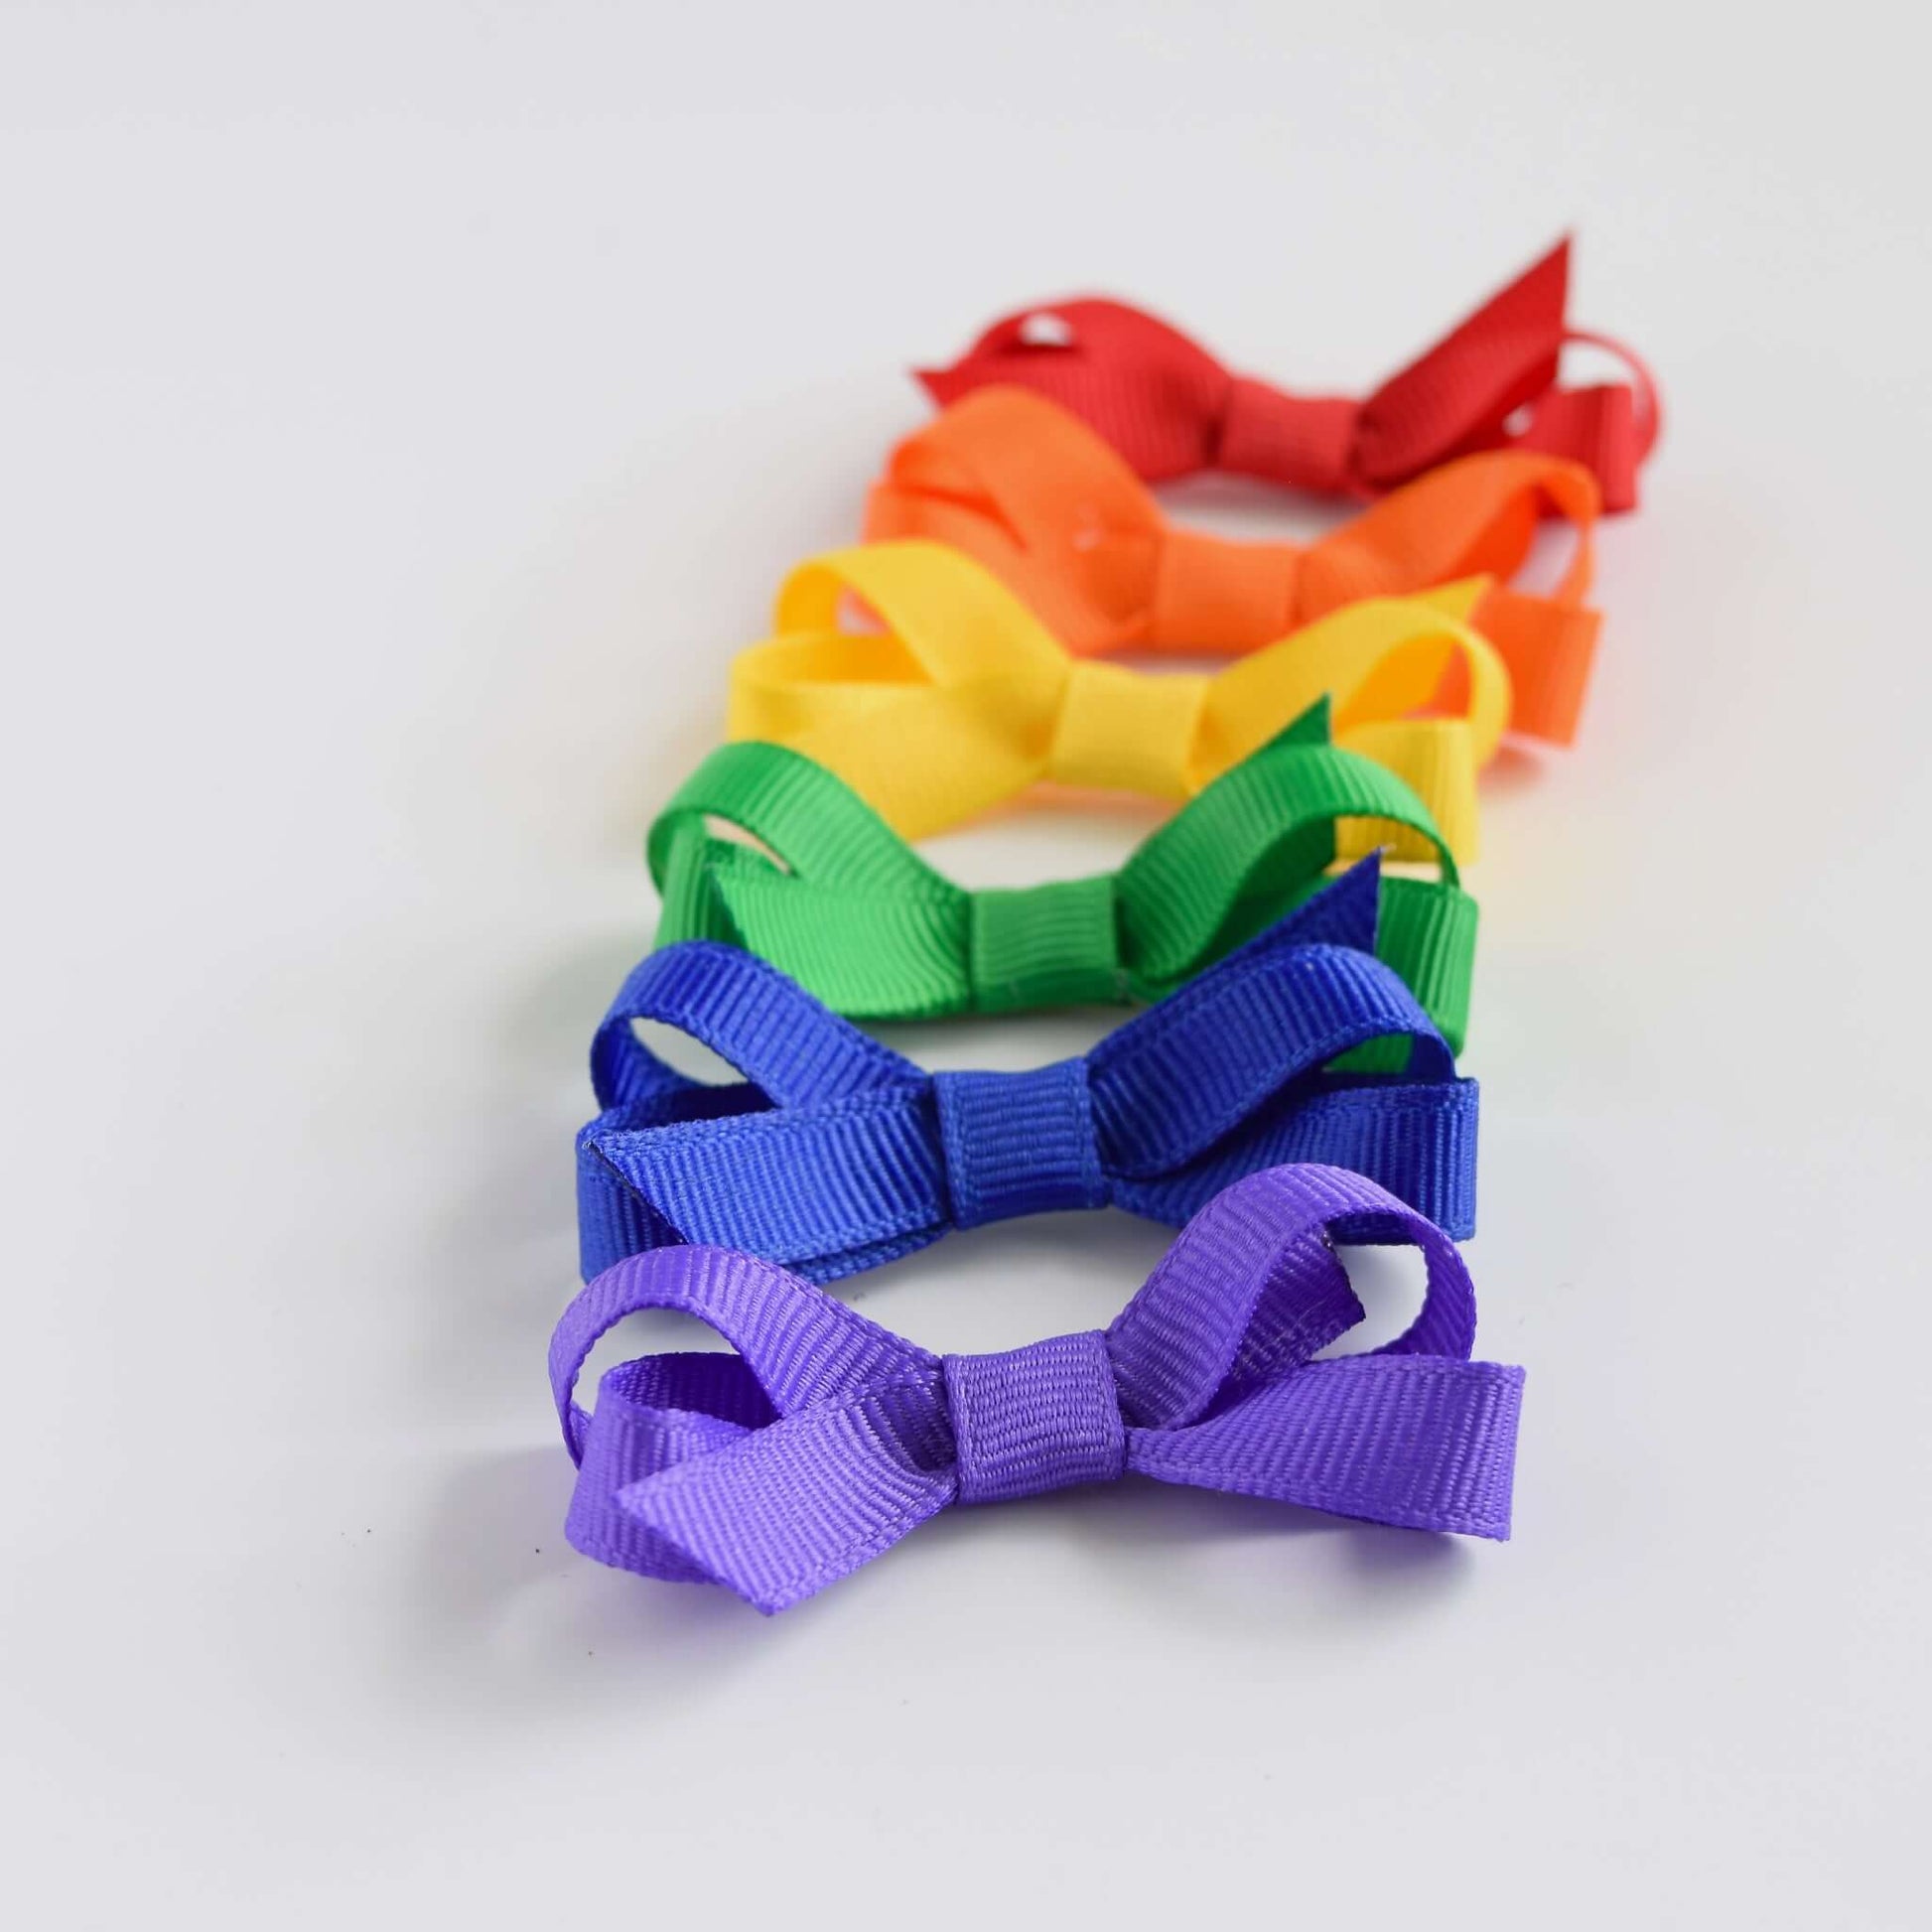 Rainbow colored baby grosgrain hair bows set with snap clip and no-slip grip, perfect for babies and toddlers' accessories.